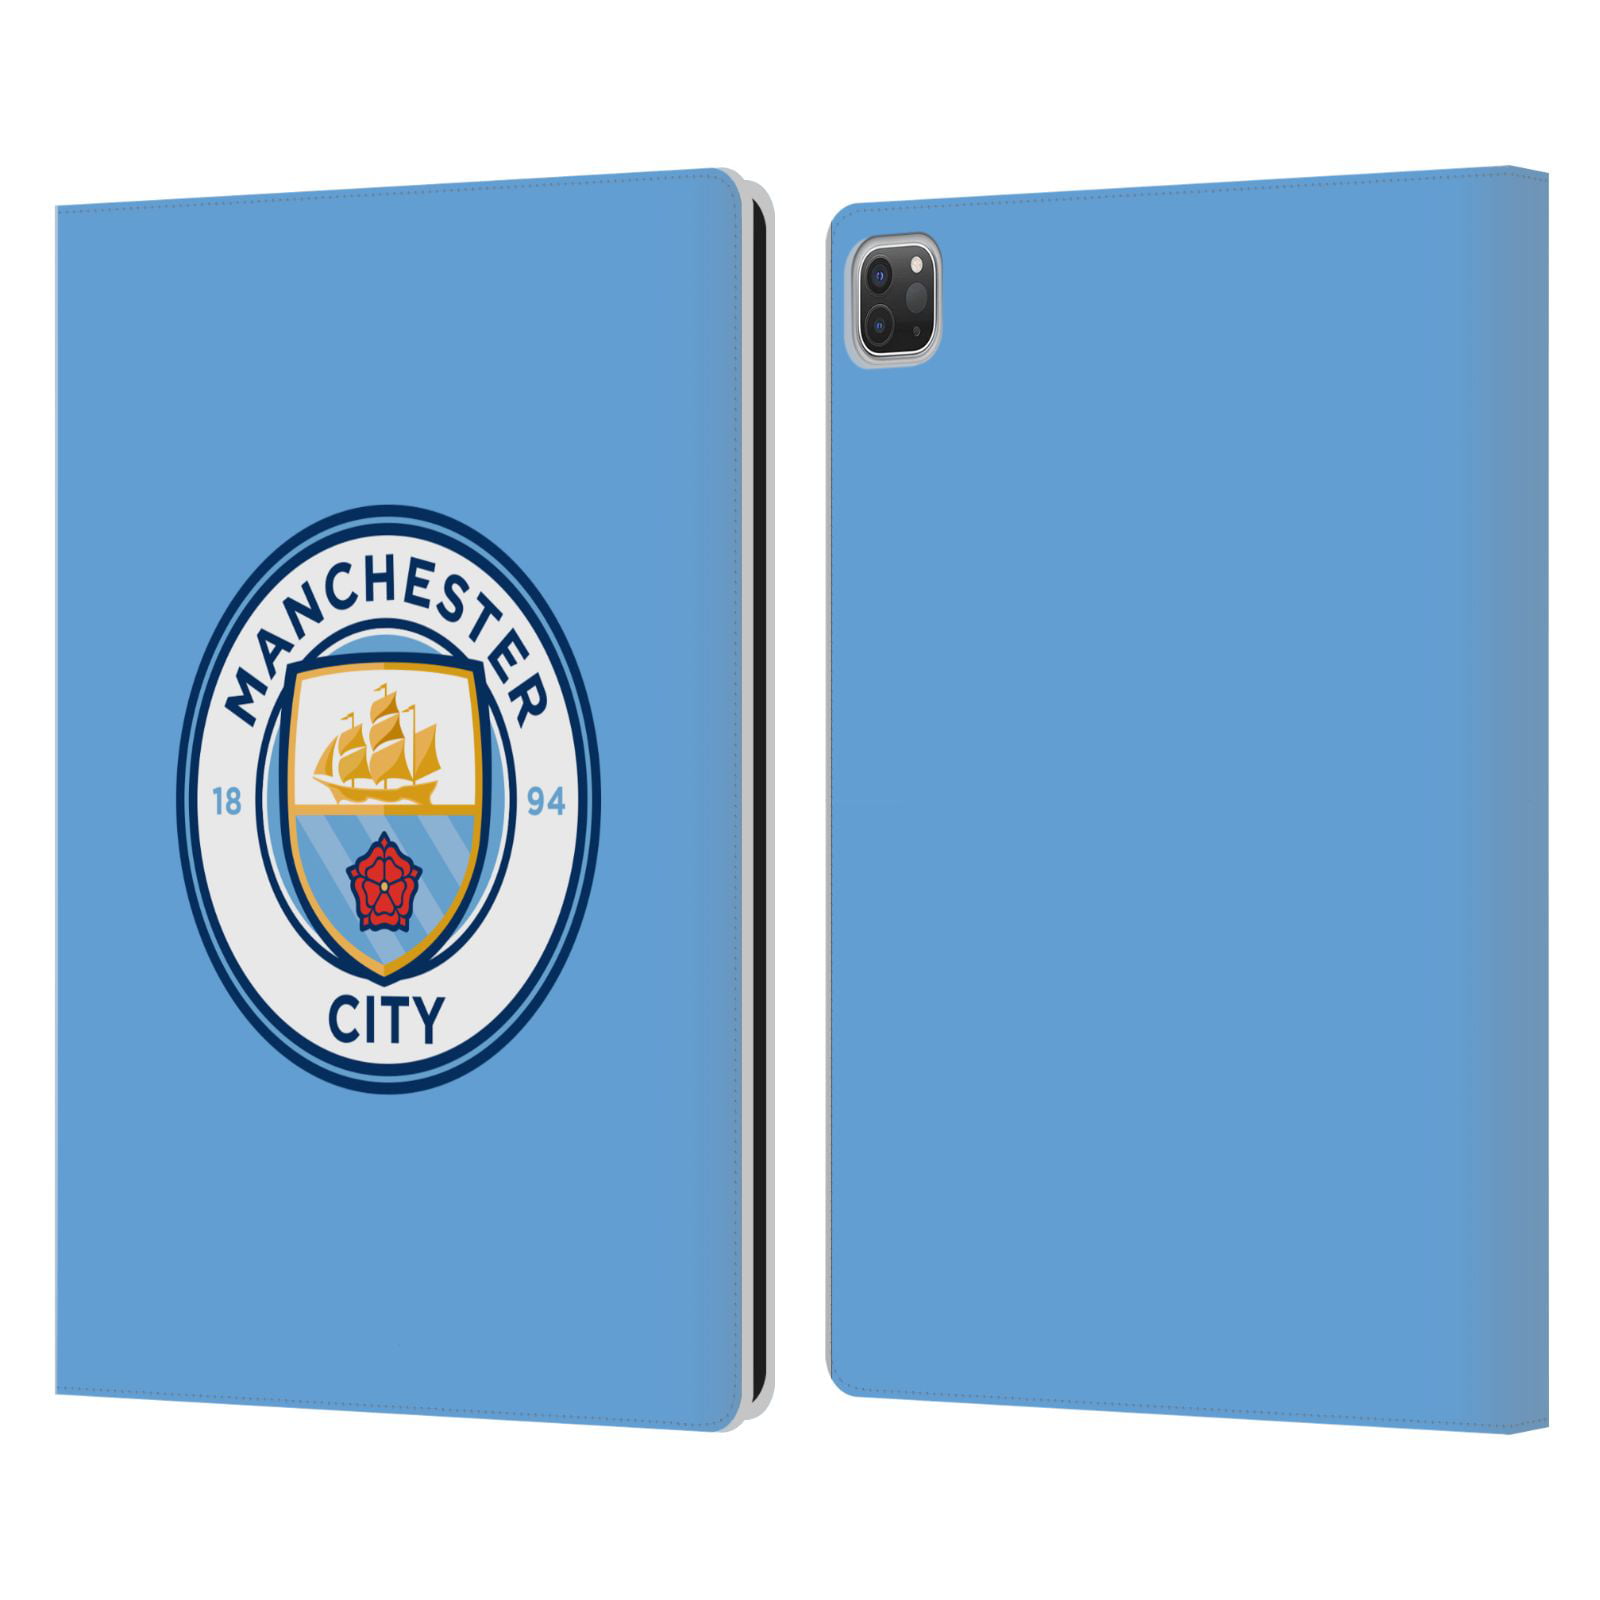 Official Manchester City FC MCFC Mini Kit Car Home Window Hanger Sign 